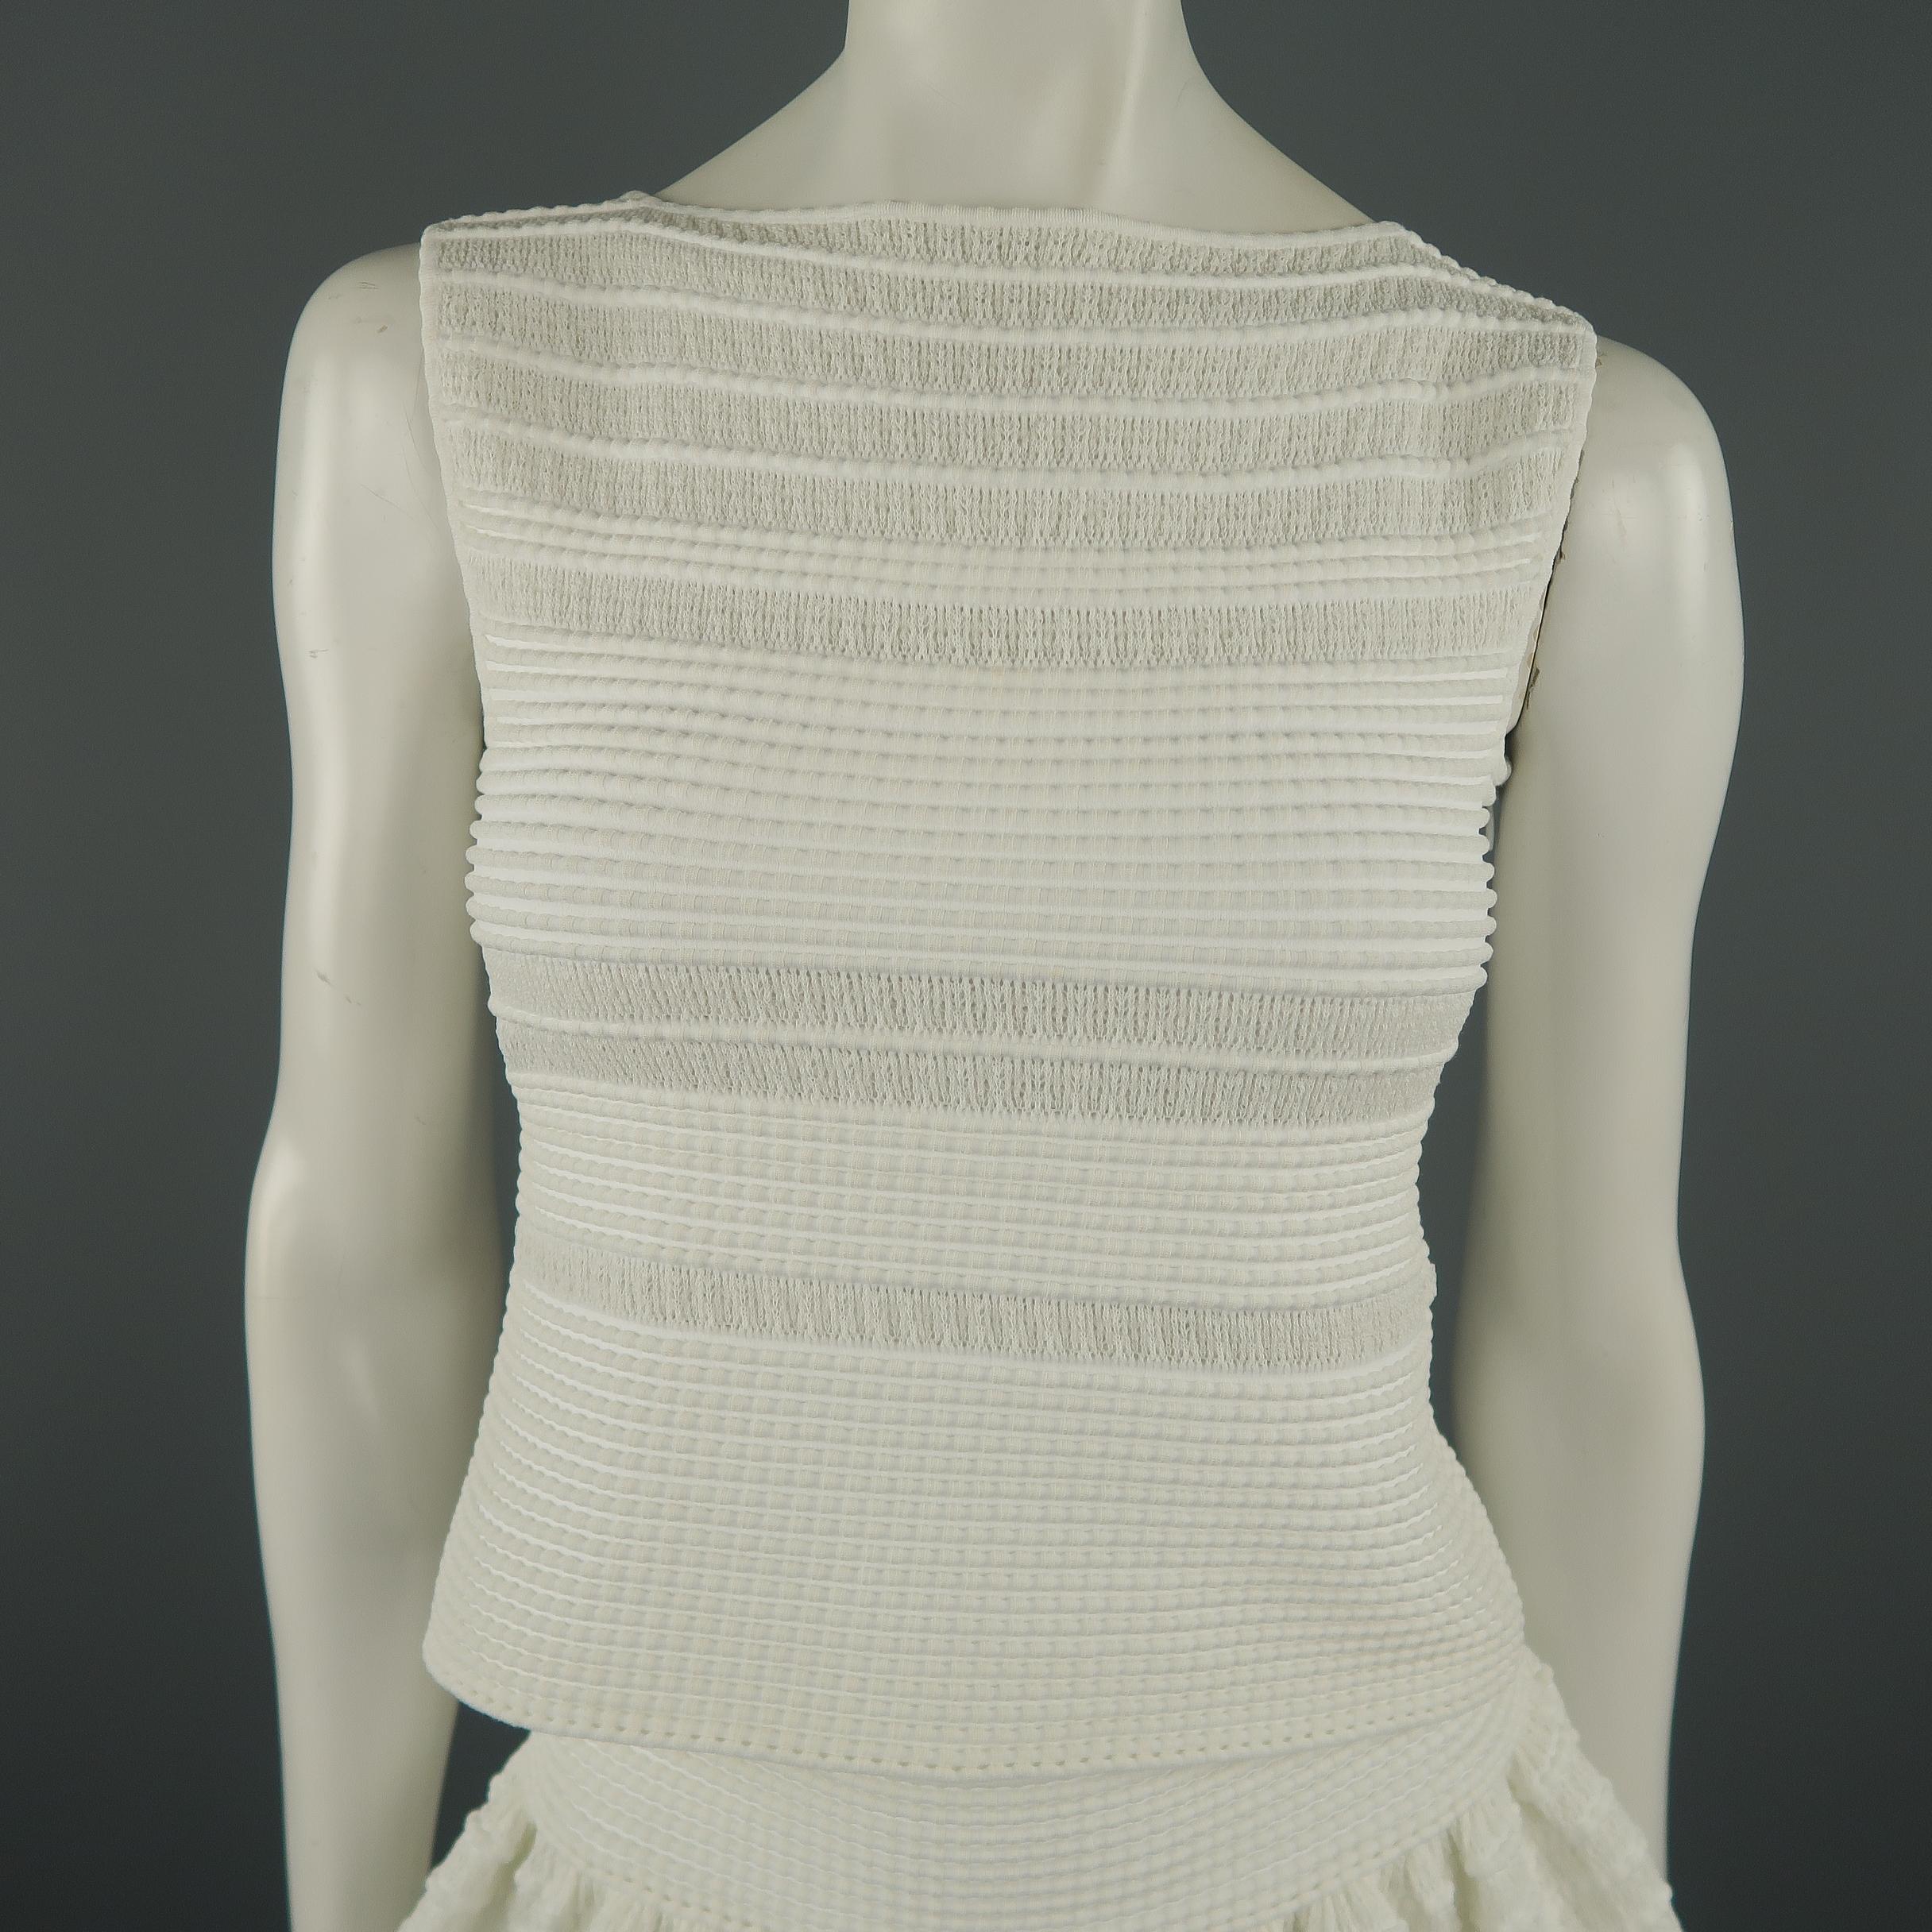 ALAIA ensemble comes in a stretch cotton textured mesh knit and includes a sleeveless boat neck top and matching ruffle A line skirt.  Made in Italy.
 
Excellent Pre-Owned Condition.
Marked: Top: FR 42 Skirt: IT 38
 
Measurements:
 
Top:
Shoulder: